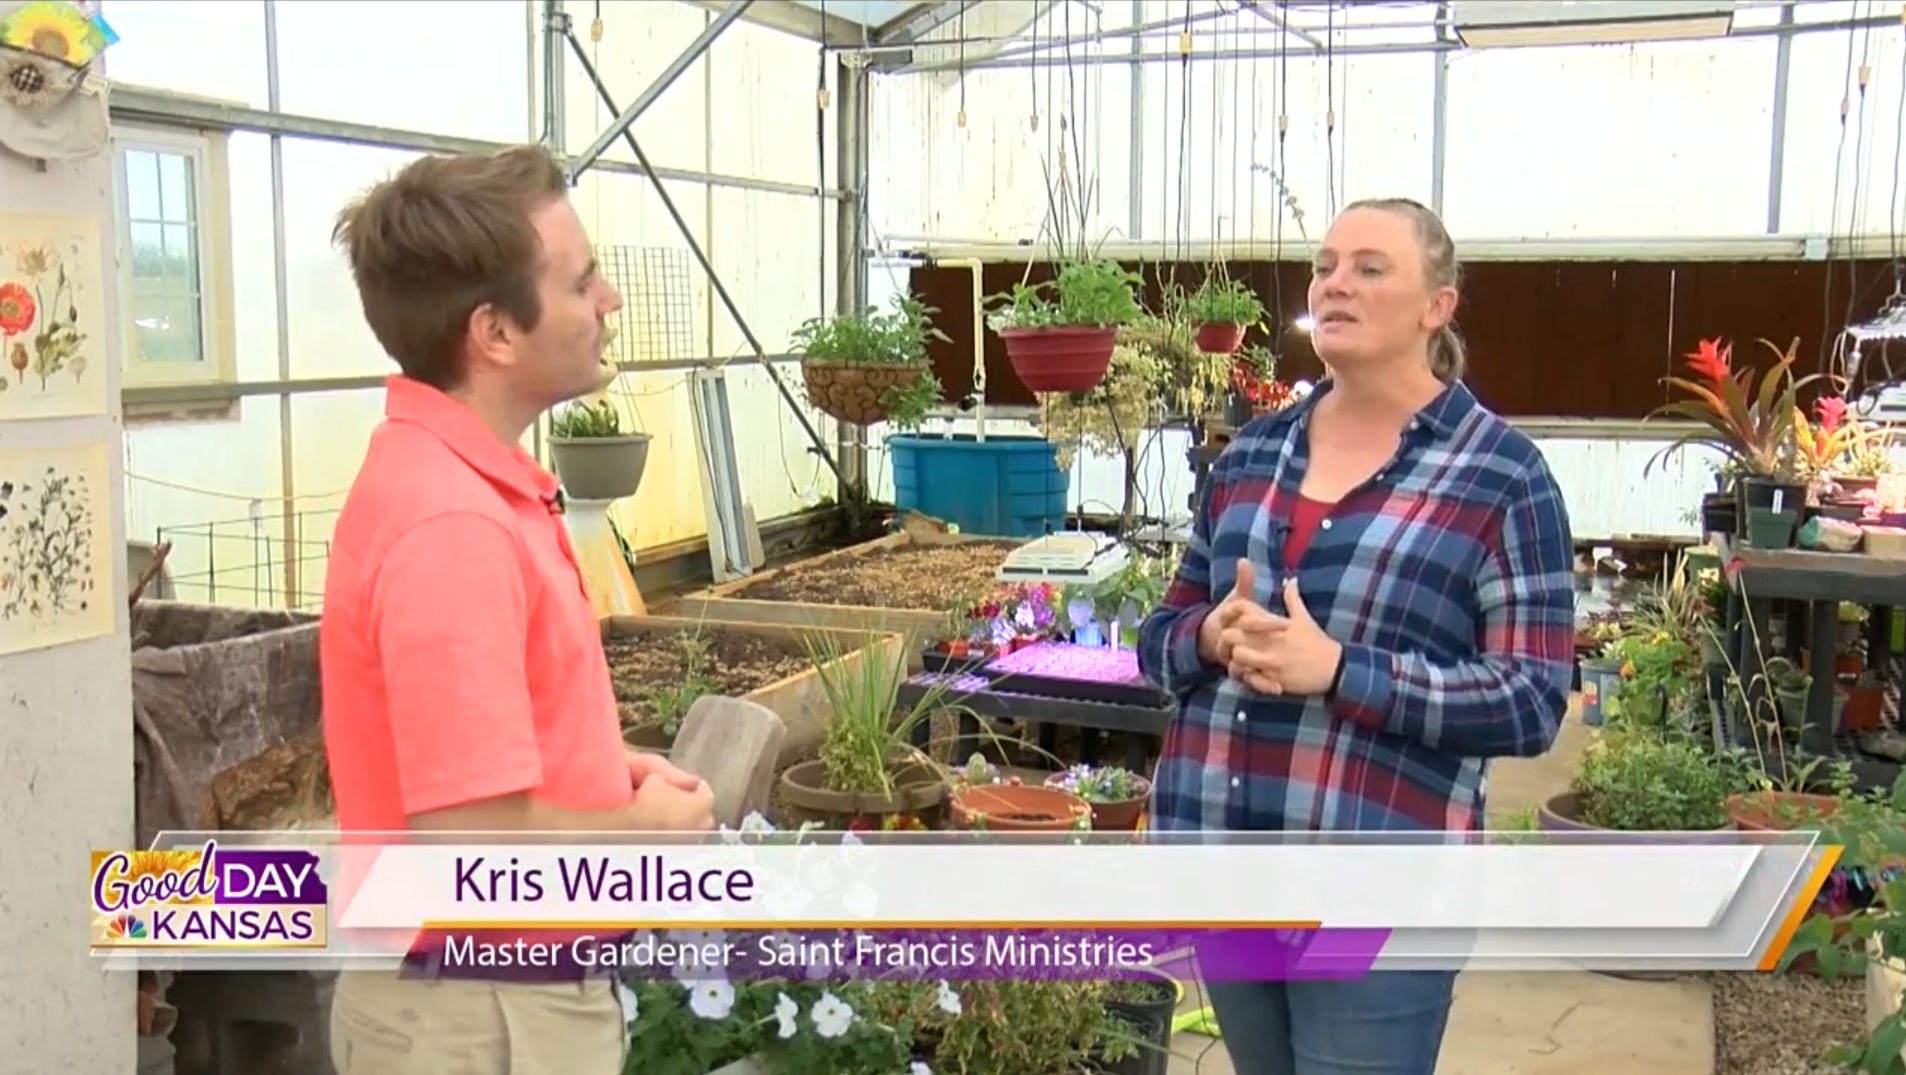 Two people are conversing inside a greenhouse filled with plants. The person on the left is wearing an orange shirt, and the person on the right, identified as Kris Wallace, is wearing a blue and red plaid shirt. The caption notes Kris Wallace as a Master Gardener from Saint Francis Ministries.